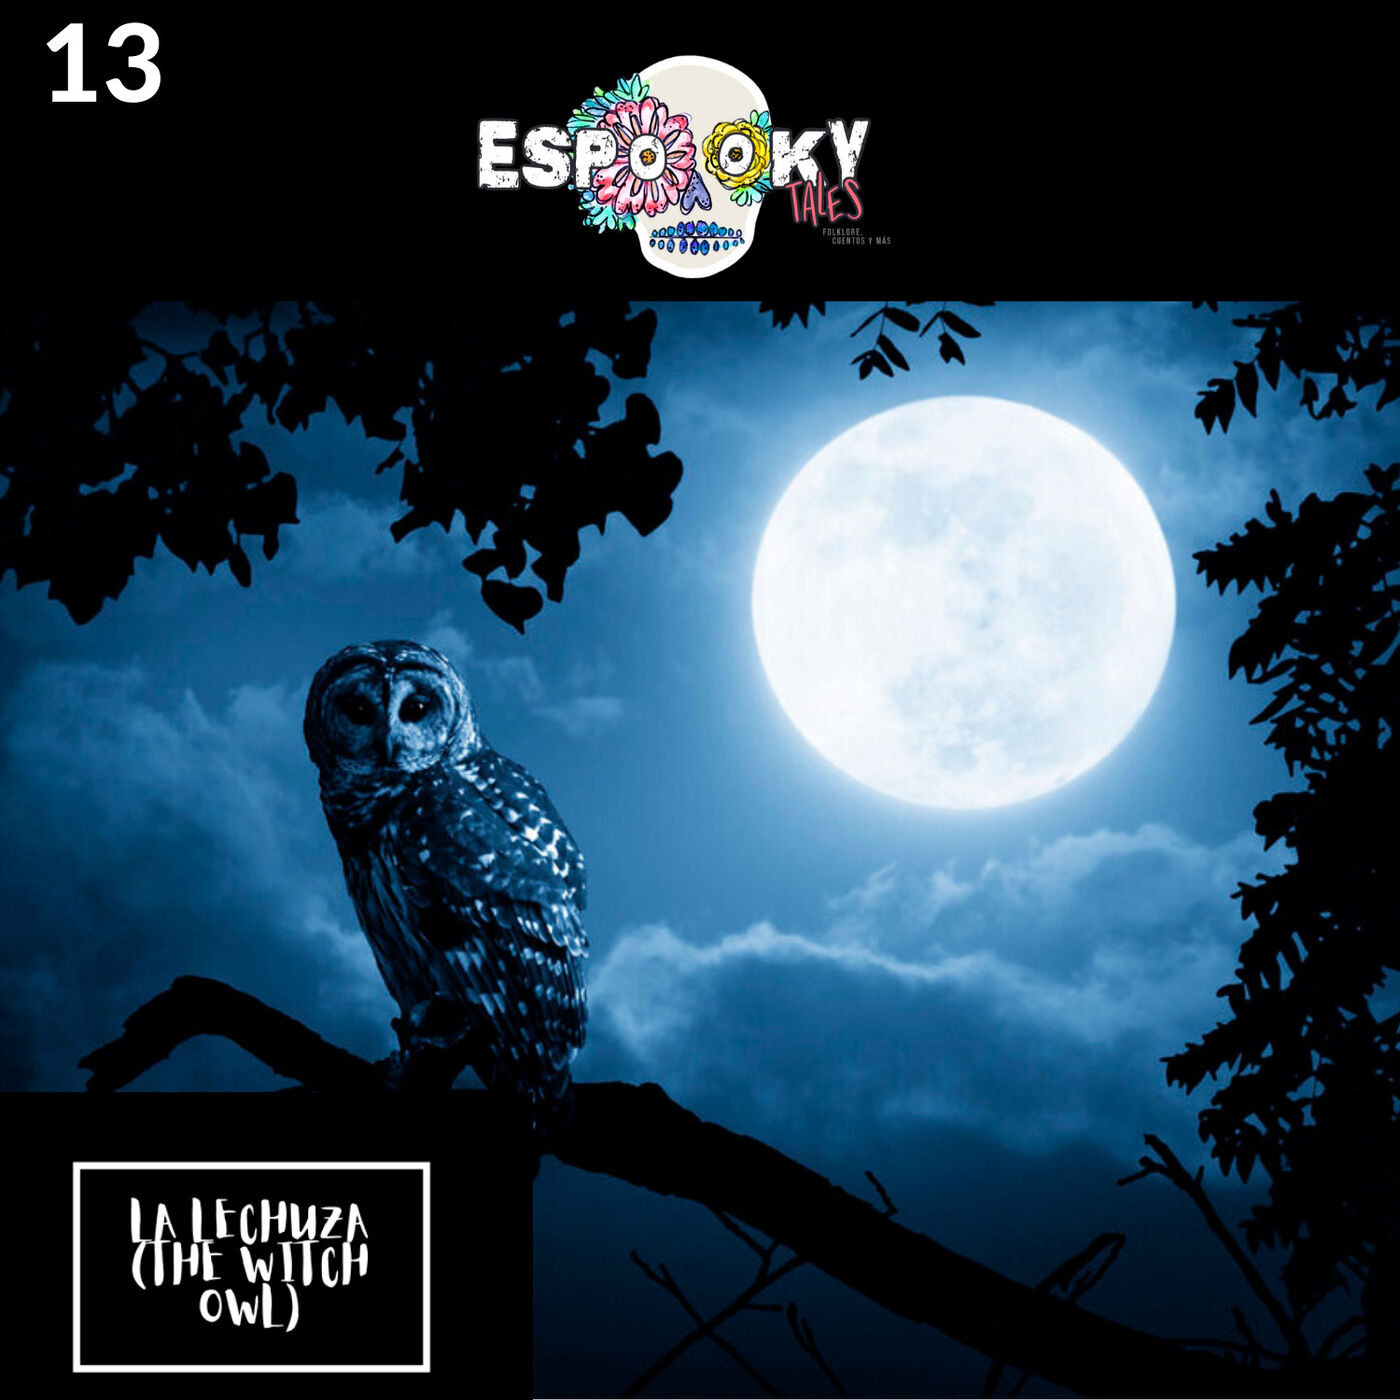 Artwork for podcast Espooky Tales